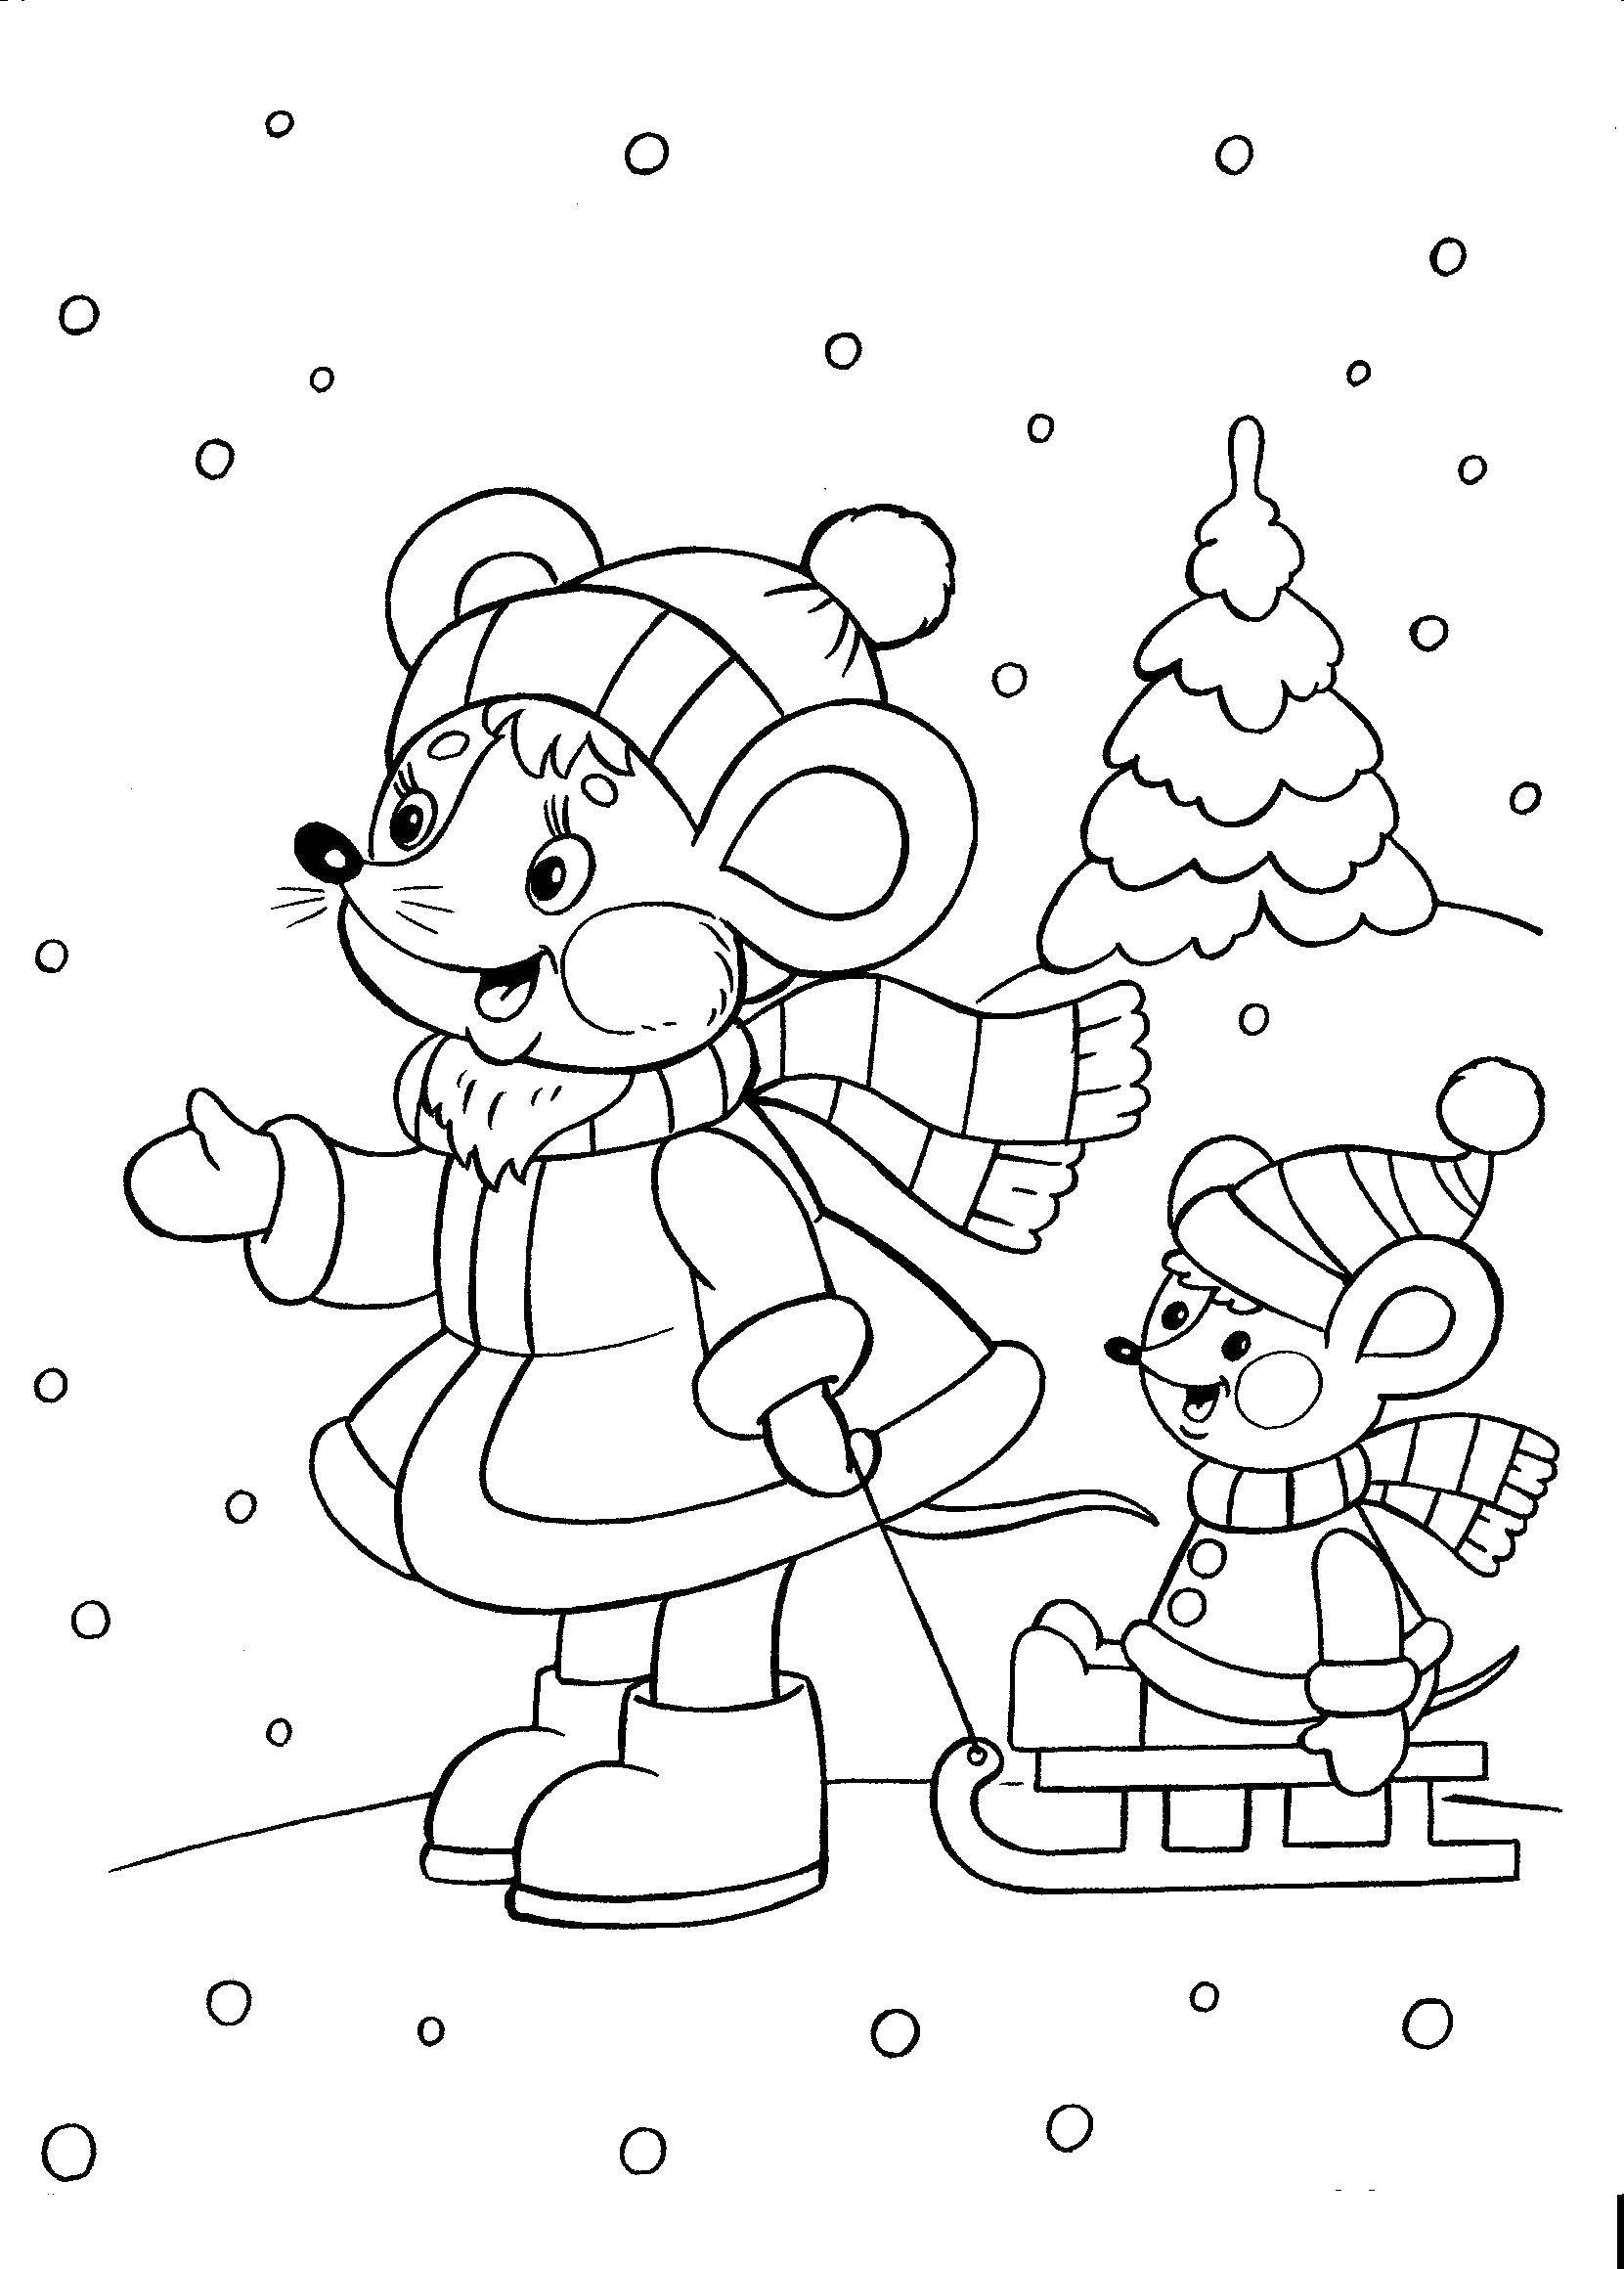 Coloring Mice sledding. Category winter. Tags:  Mouse, animals.